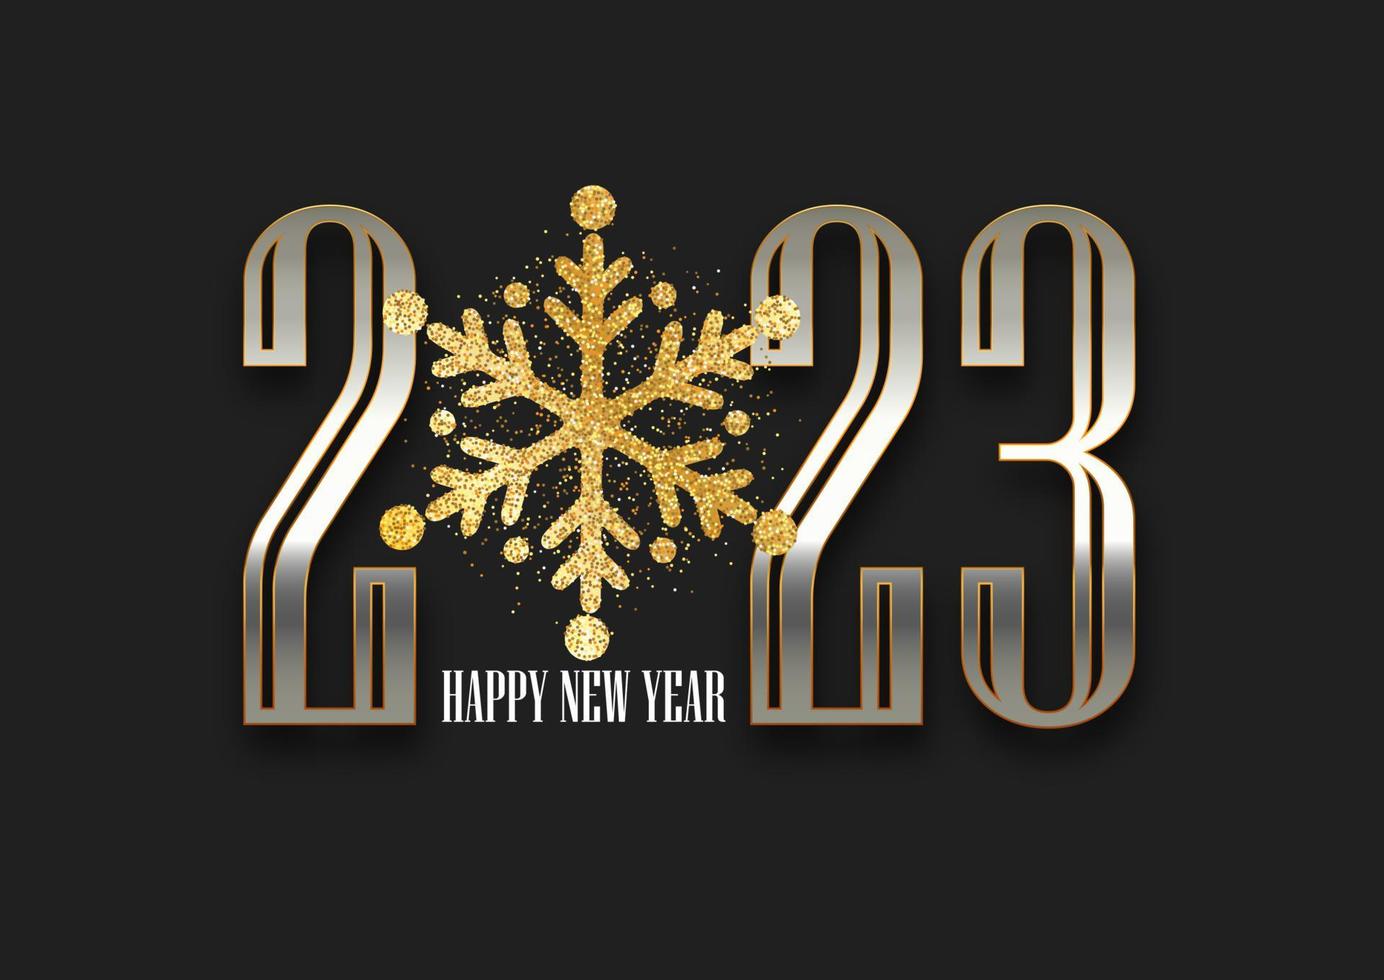 glittery snowflake happy new year background design vector